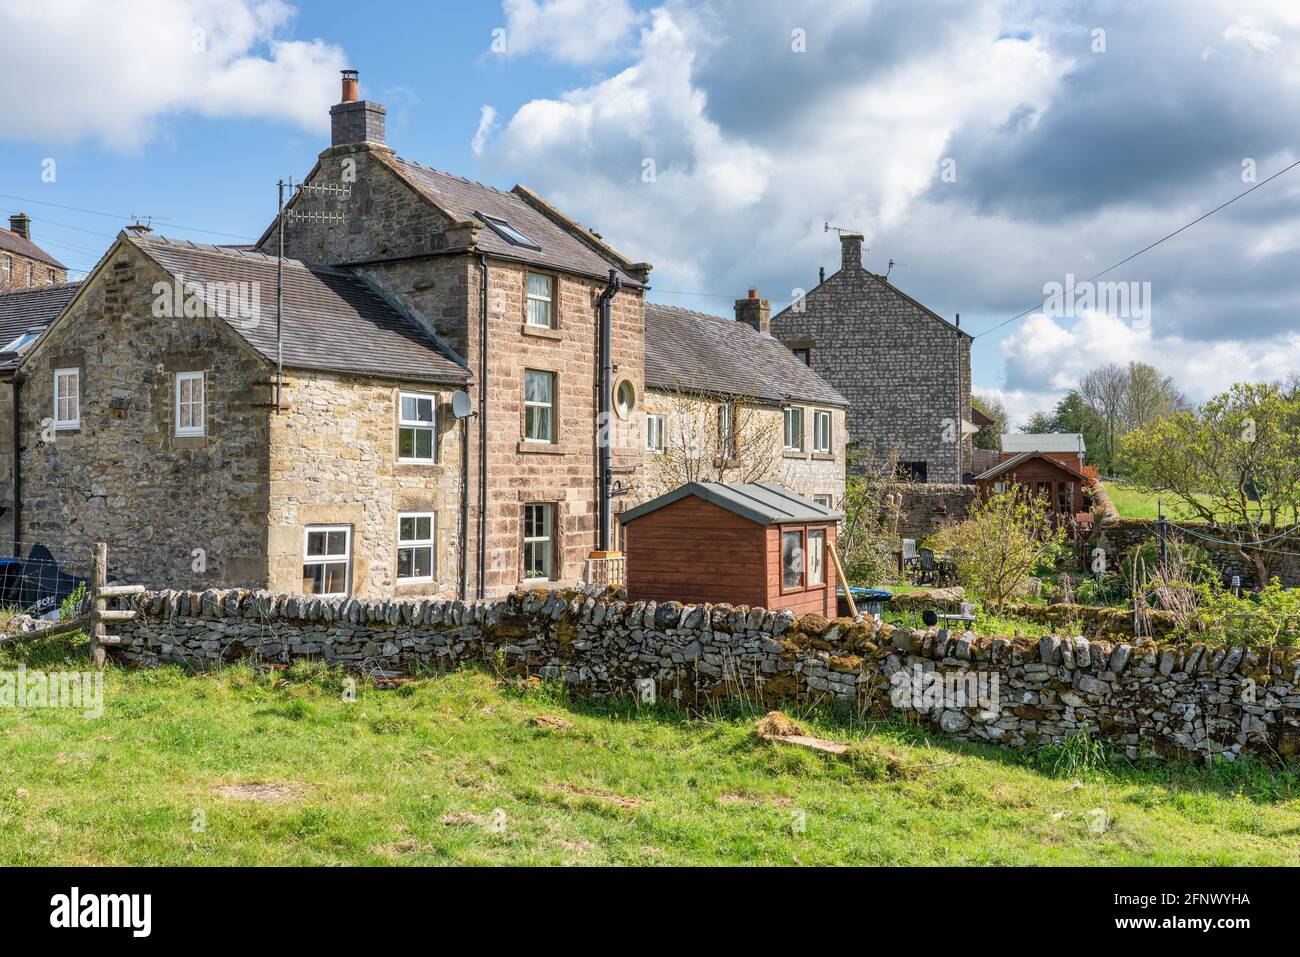 Stone cottages by the River Bradford in the village of Youlgreave in the Derbyshire Peak District UK Stock Photo